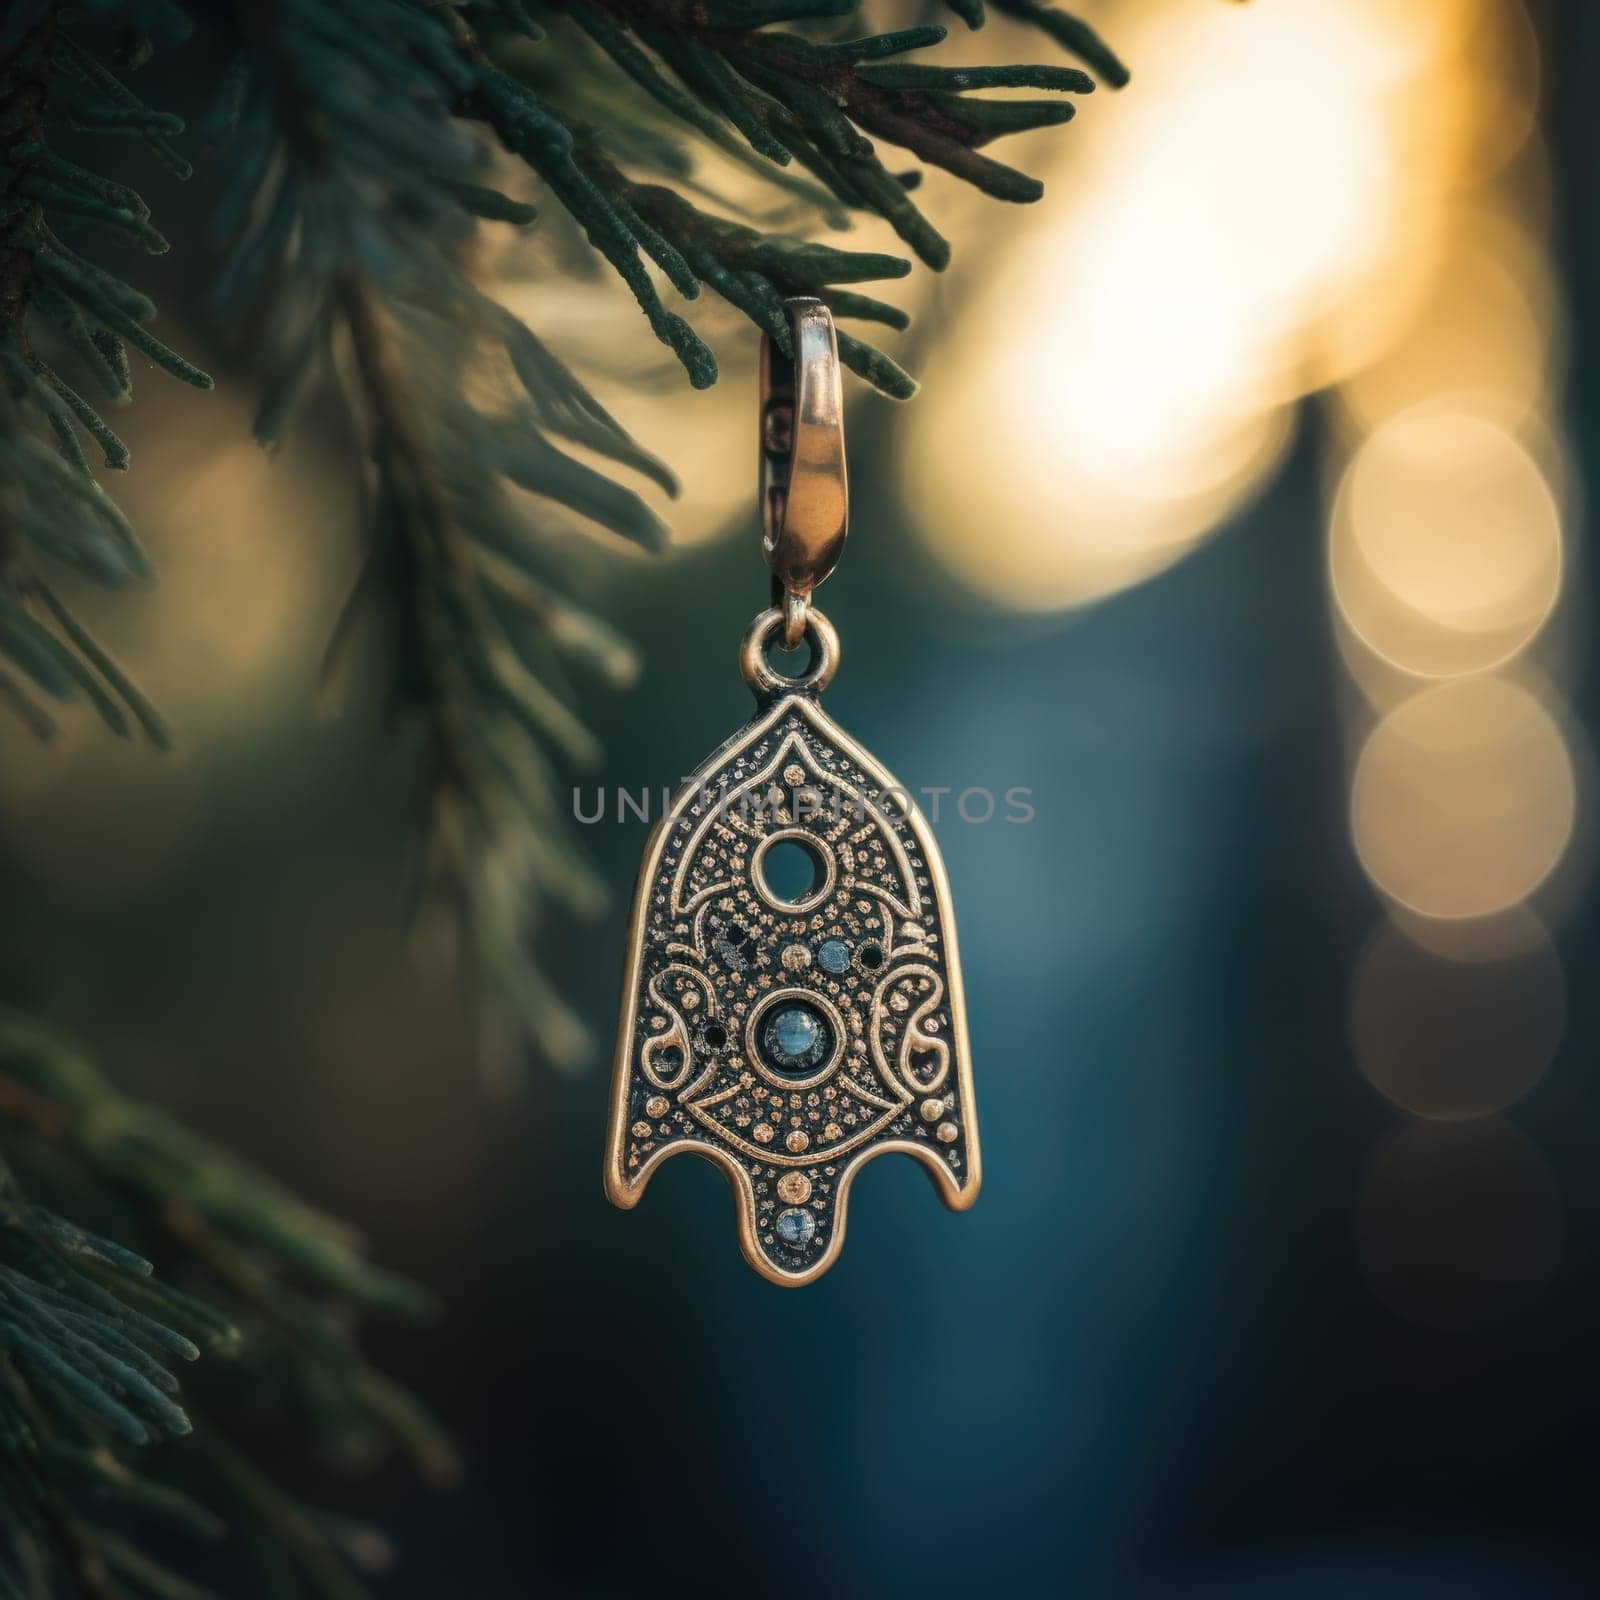 A gold hamsa pendant hanging from a tree branch, AI by starush